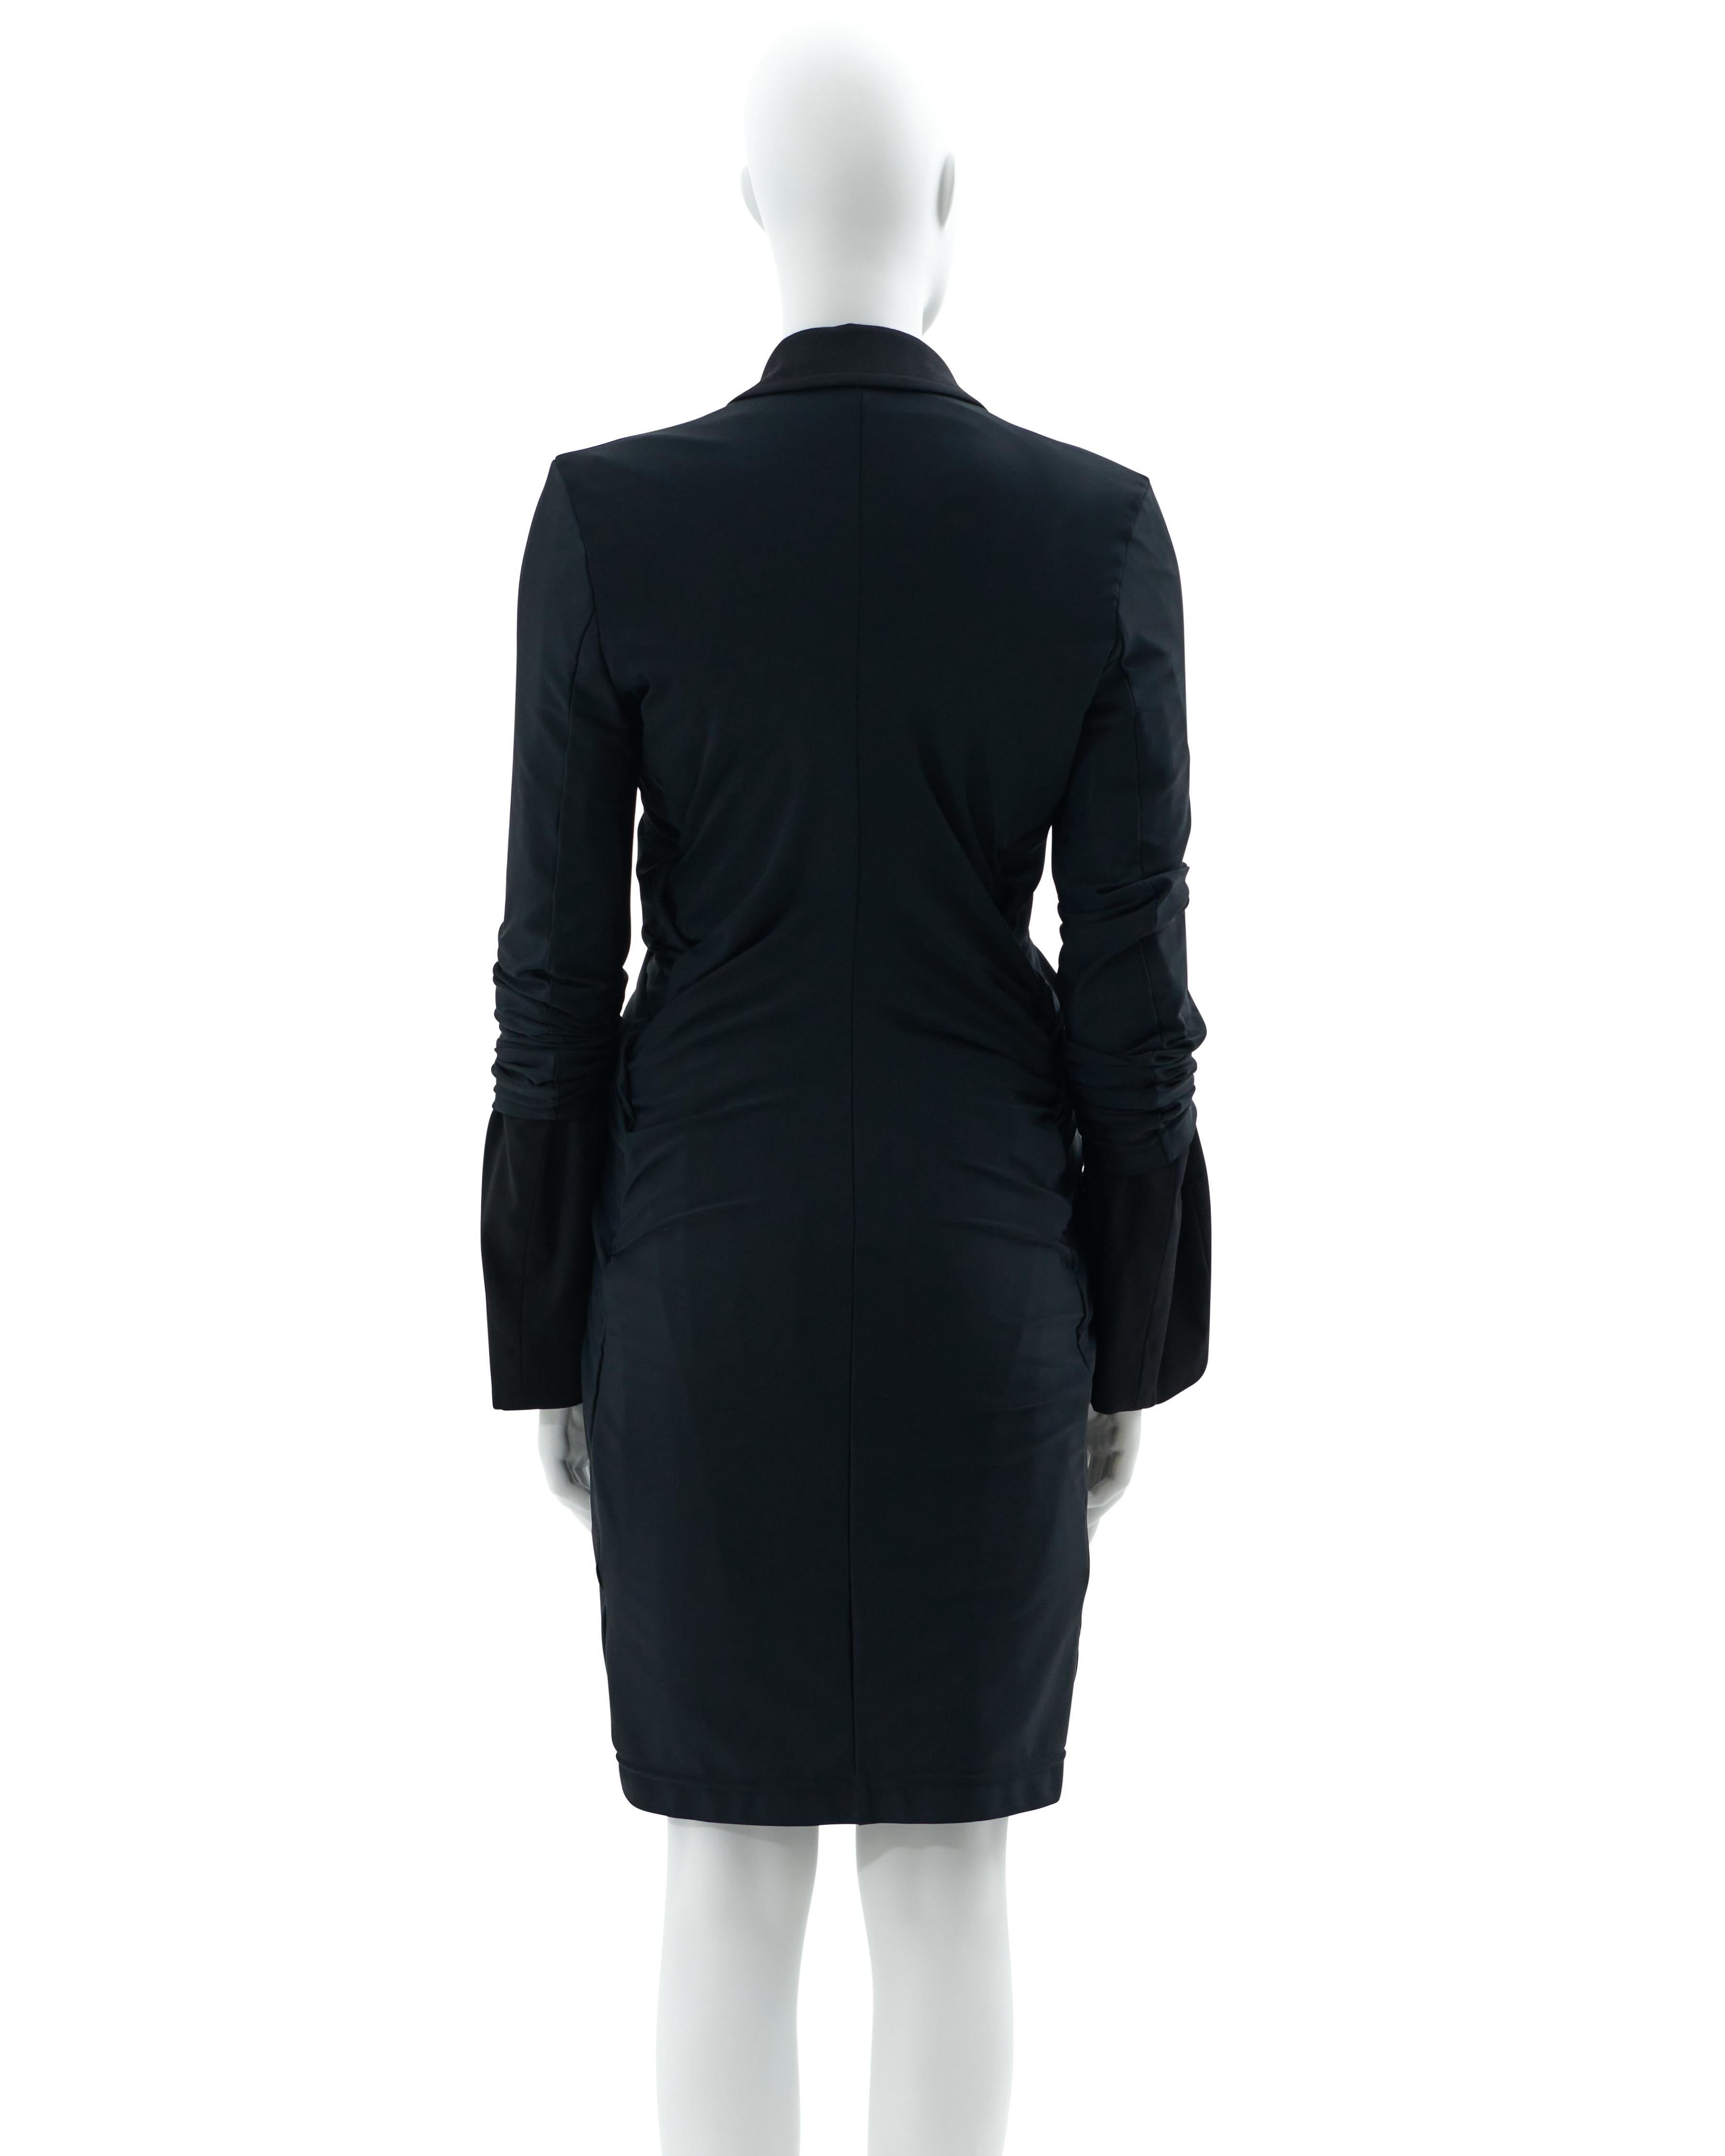  Comme des Garçons F/W 2007/08  Black and blue wool midi coat In Excellent Condition For Sale In Milano, IT